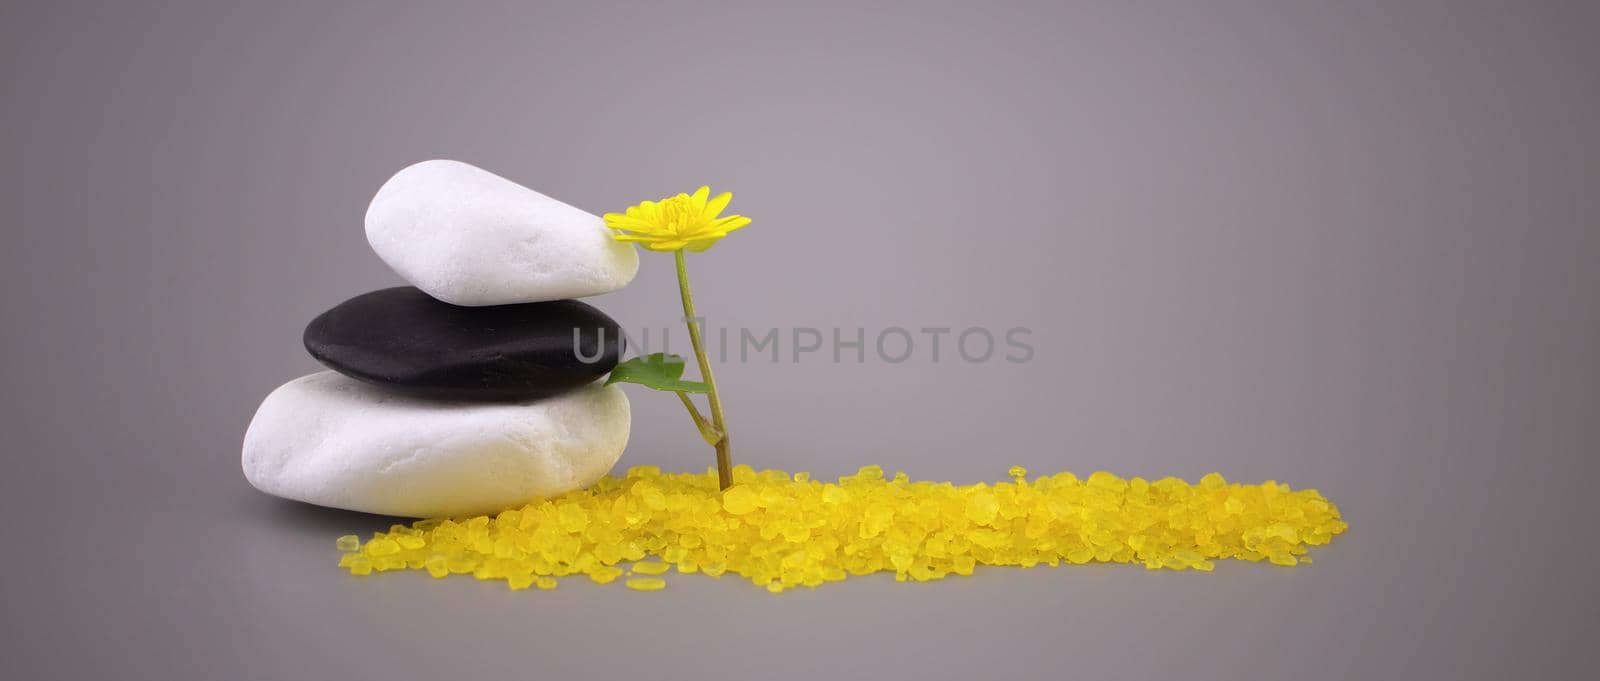 Zen still life with stacked stones and yellow flower by NetPix